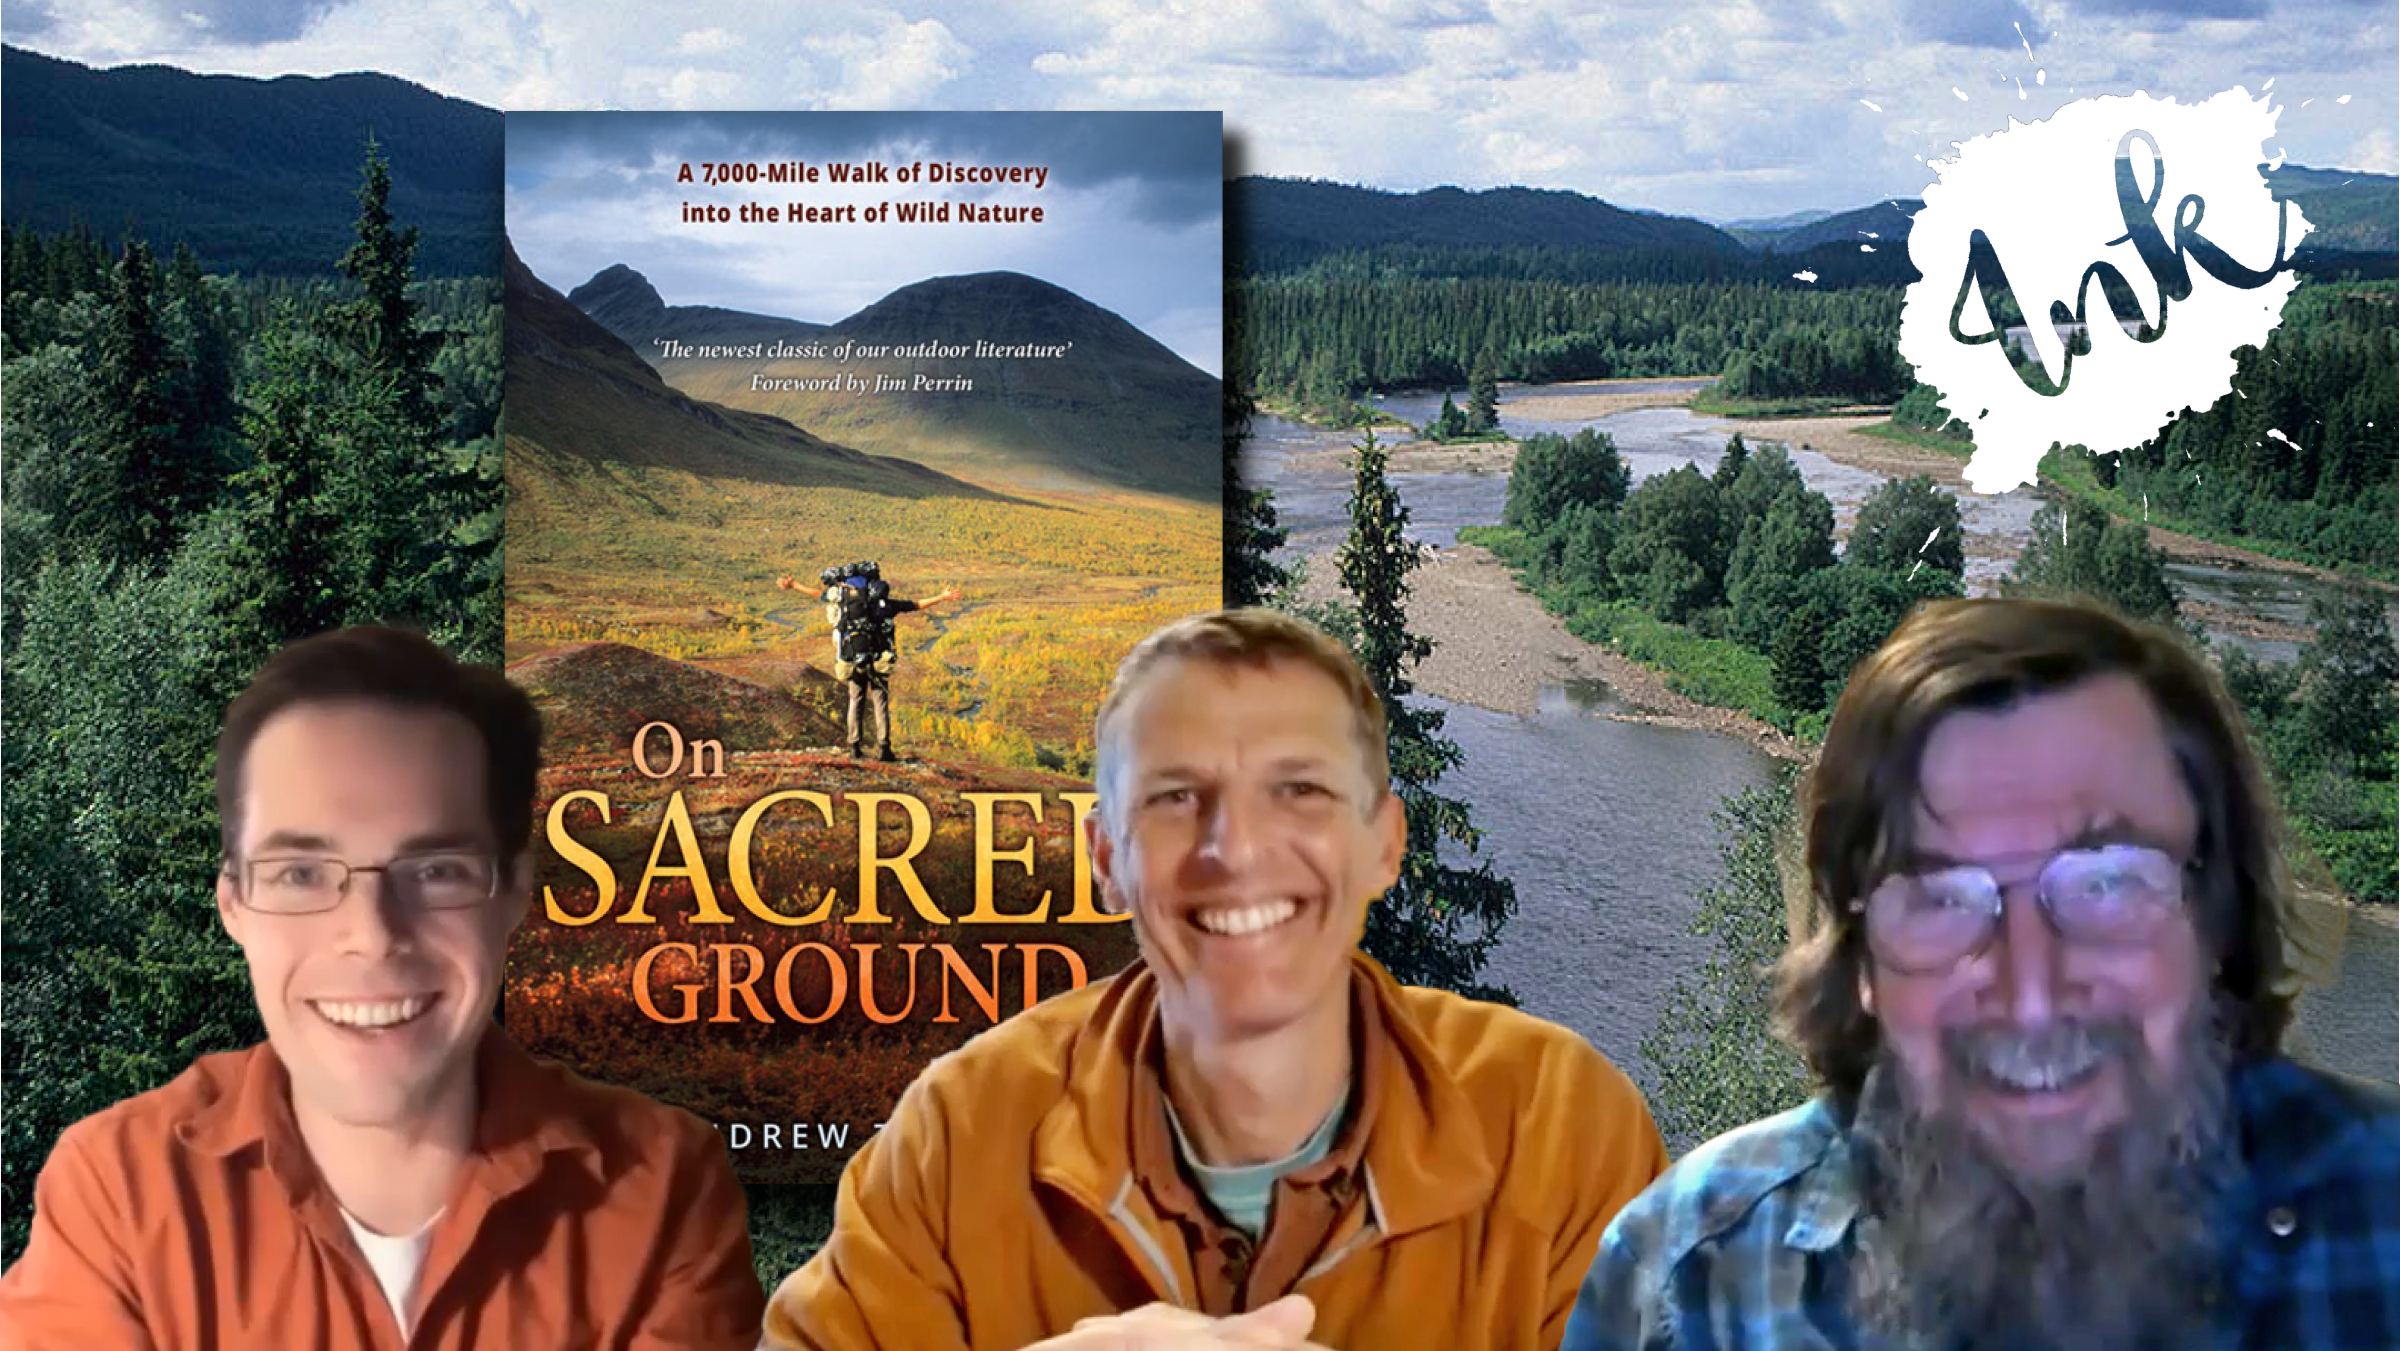 On Sacred Ground with these three wandering philosophers